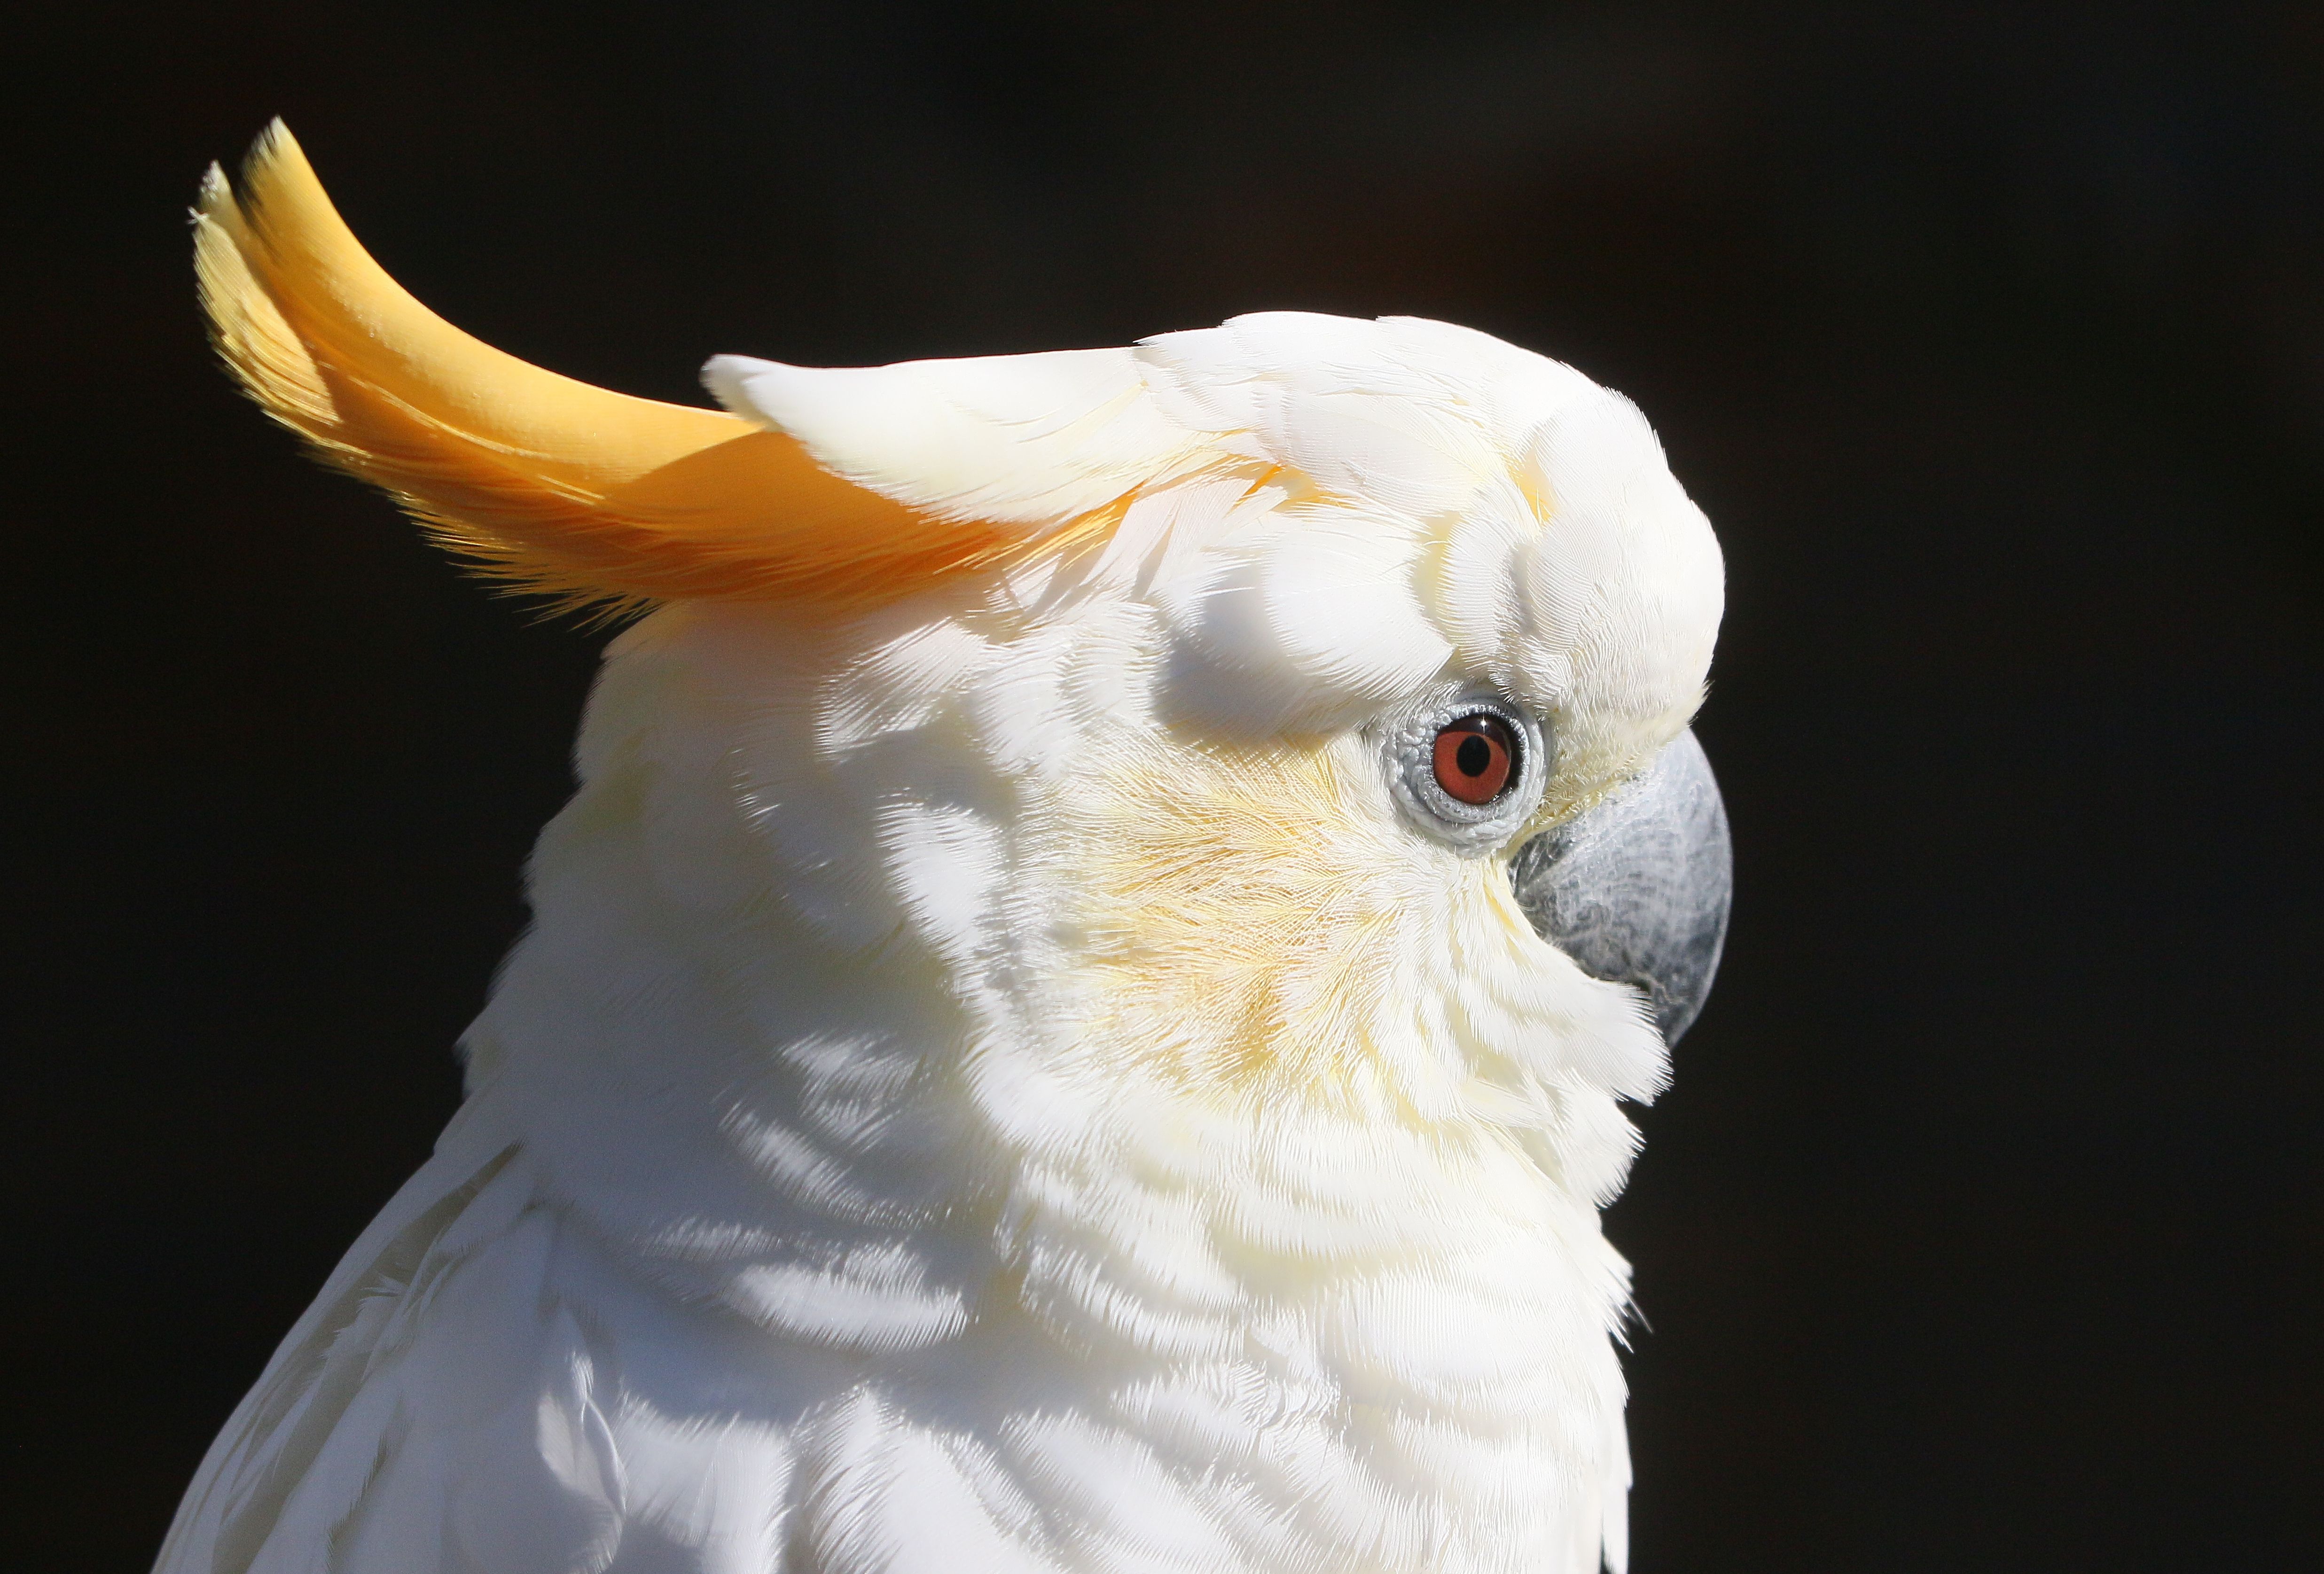 Wanted: a new home for a cockatoo, and the exotic bird